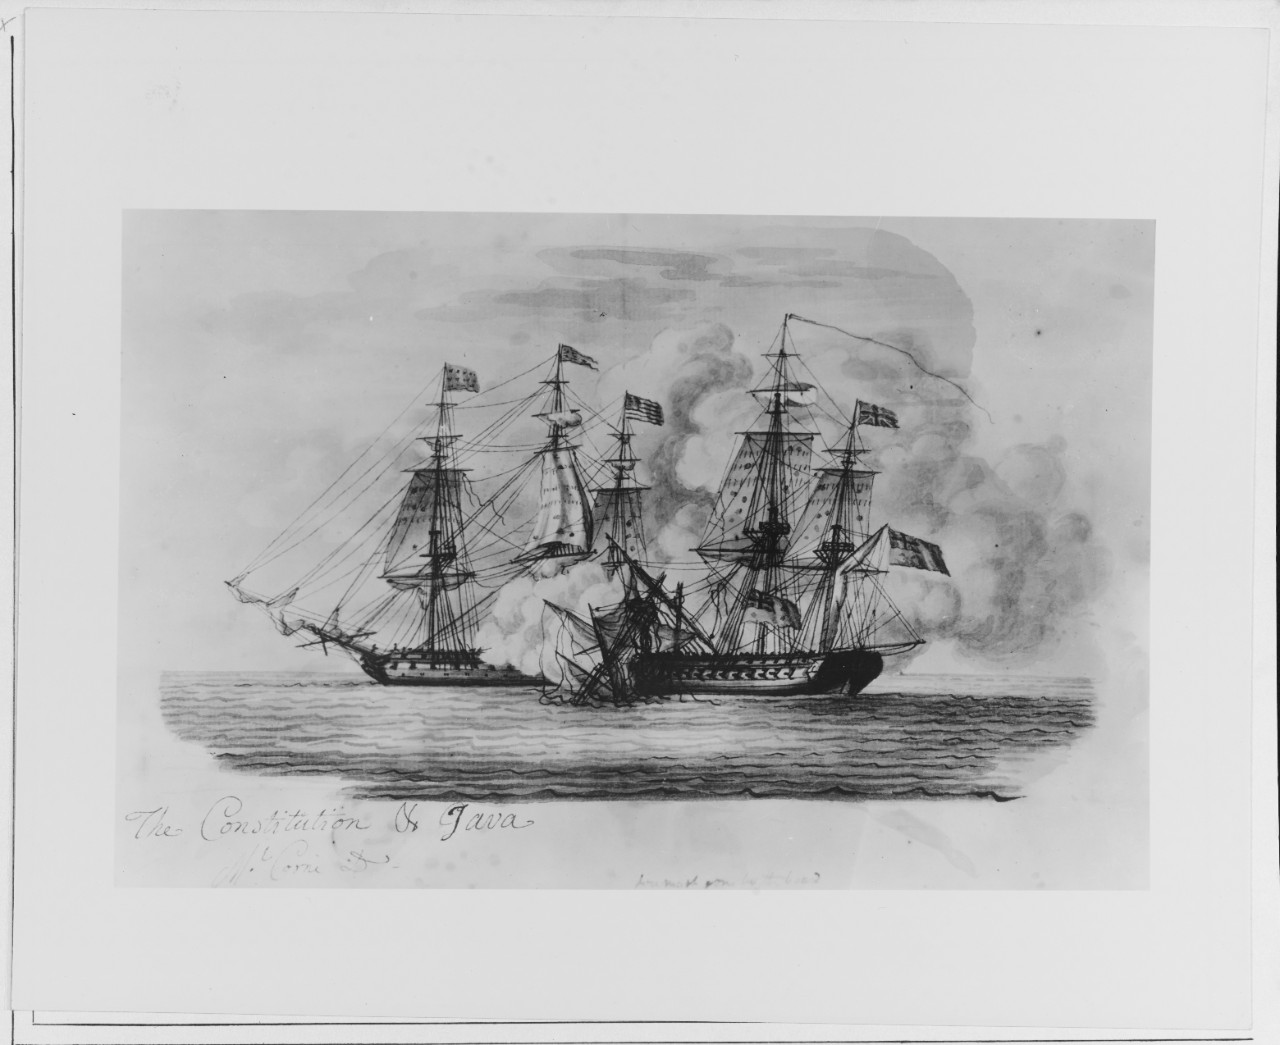 USS CONSTITUTION AND JAVA 1812